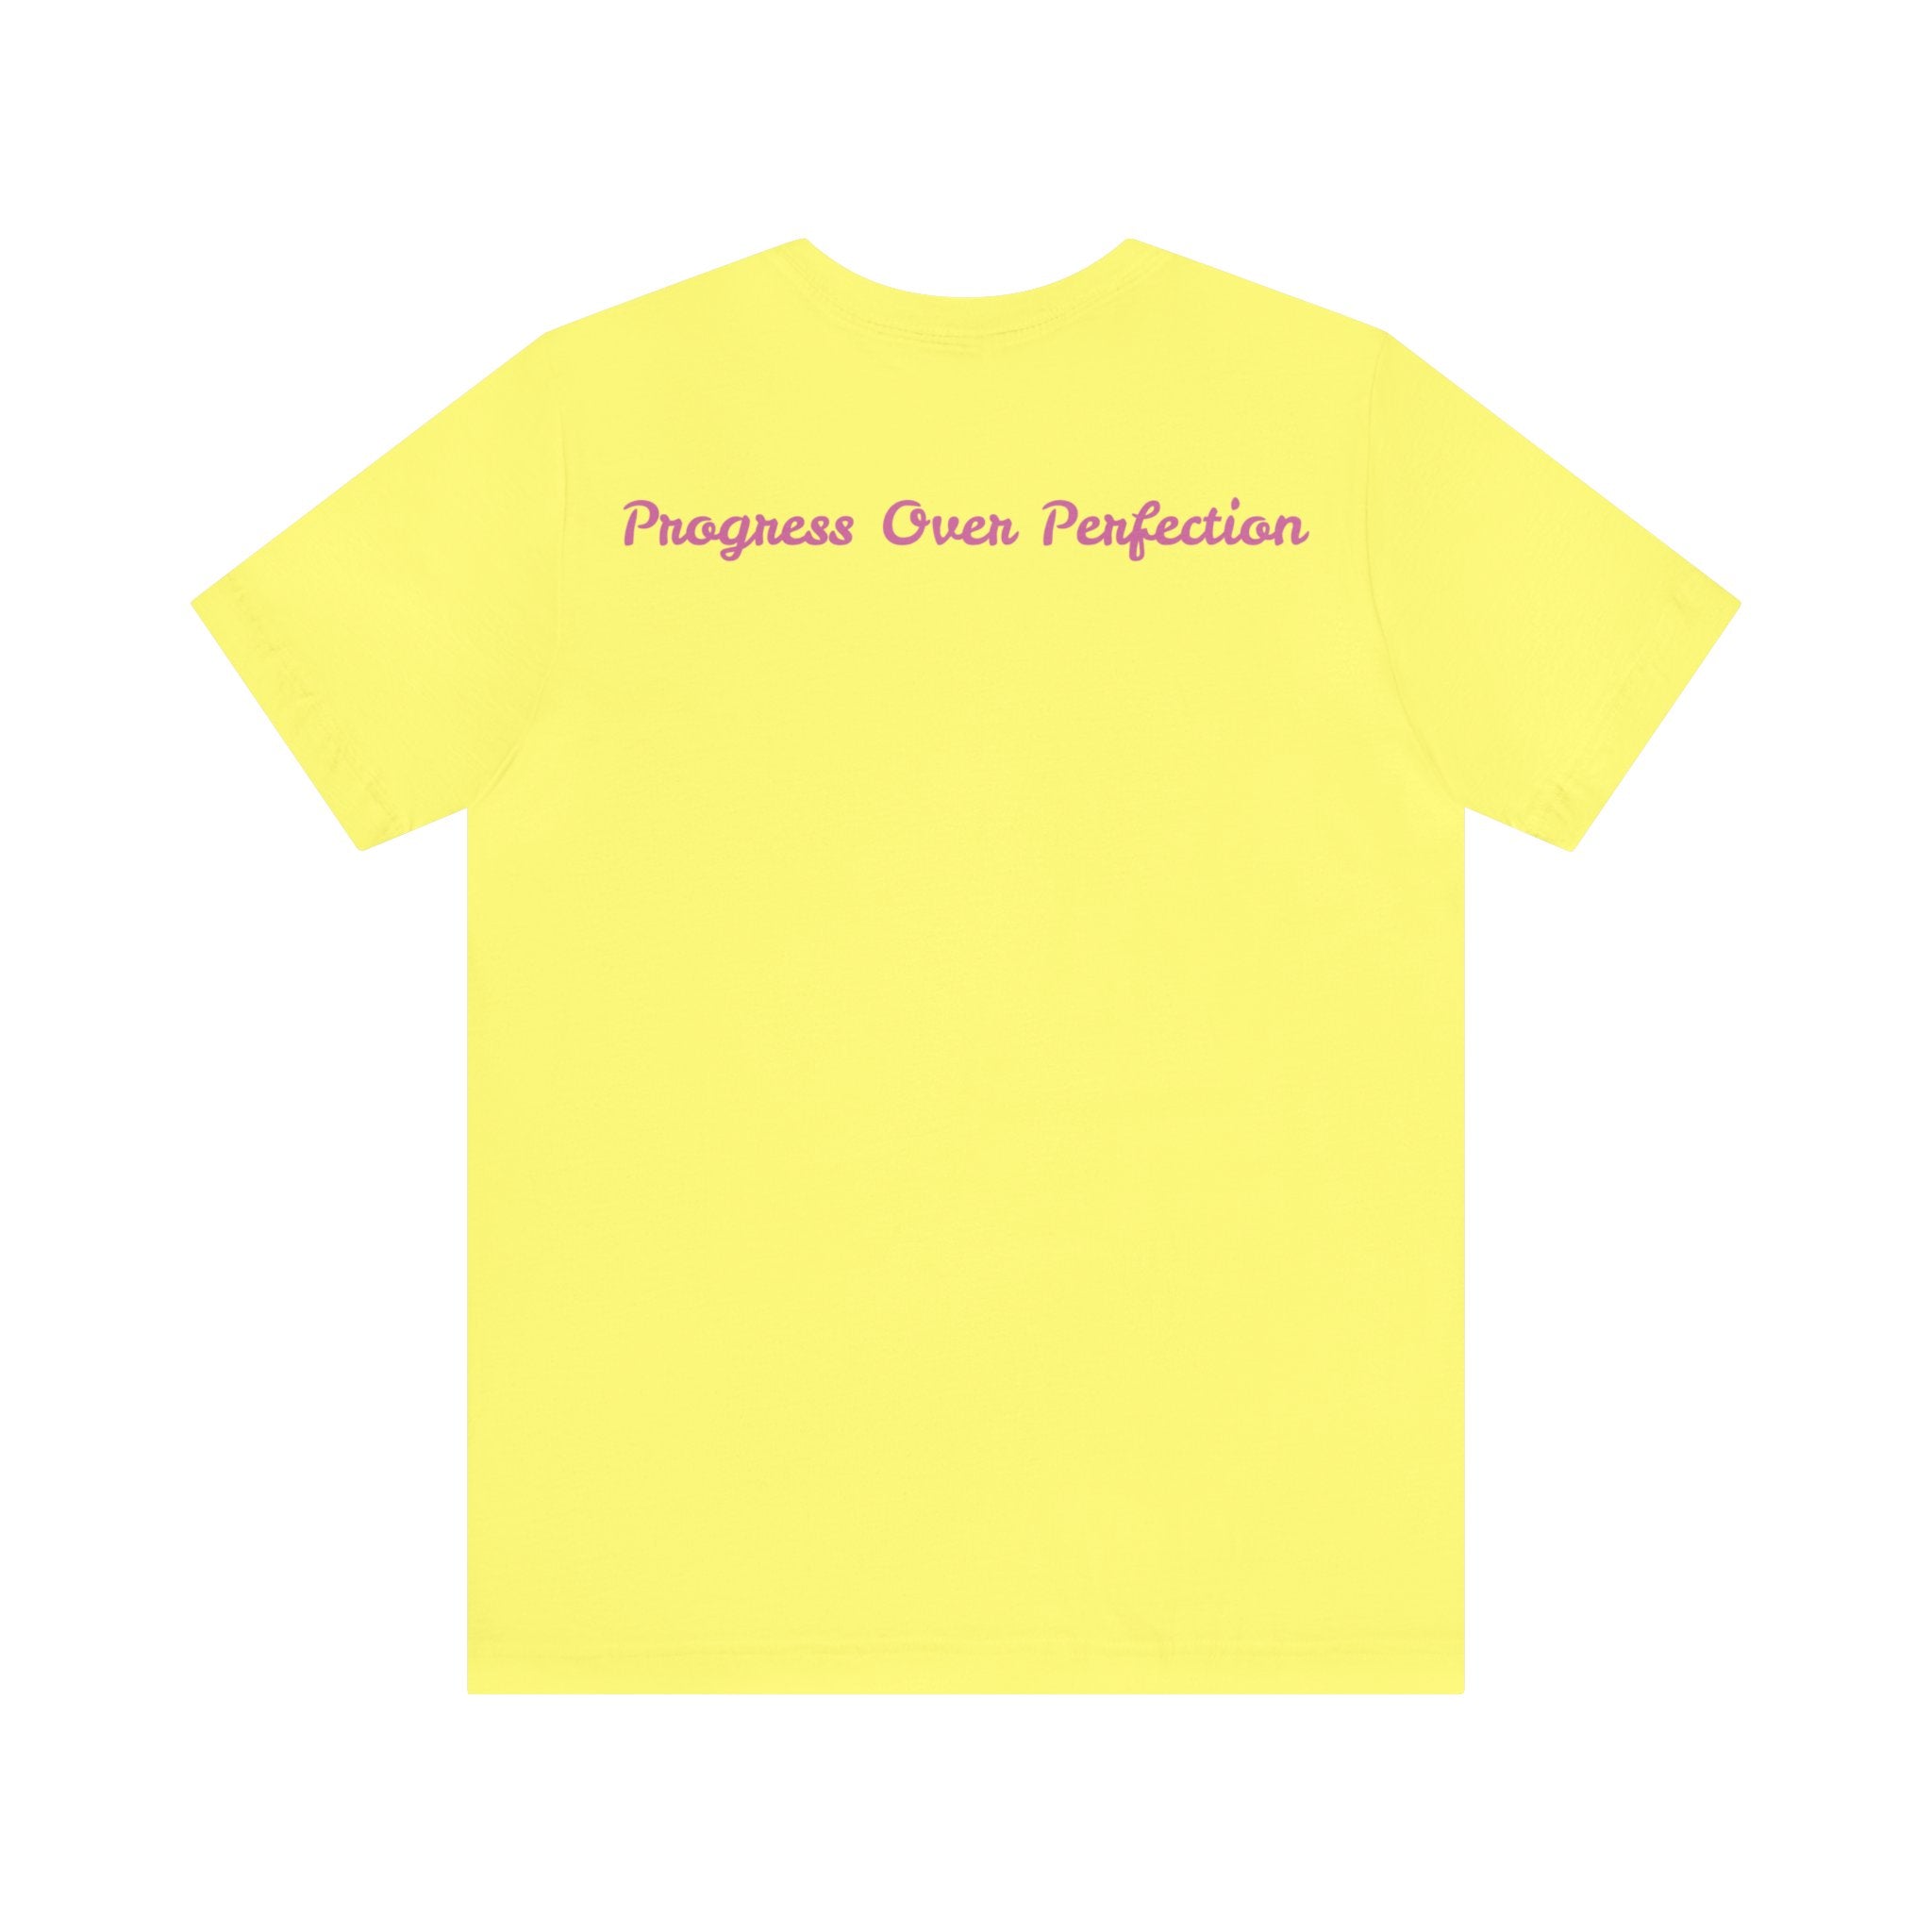 Progress Over Perfection Tee - Bella+Canvas 3001 Yellow Airlume Cotton Bella+Canvas 3001 Crew Neckline Jersey Short Sleeve Lightweight Fabric Mental Health Support Retail Fit Tear-away Label Tee Unisex Tee T-Shirt 16719361133966833348_2048 Printify